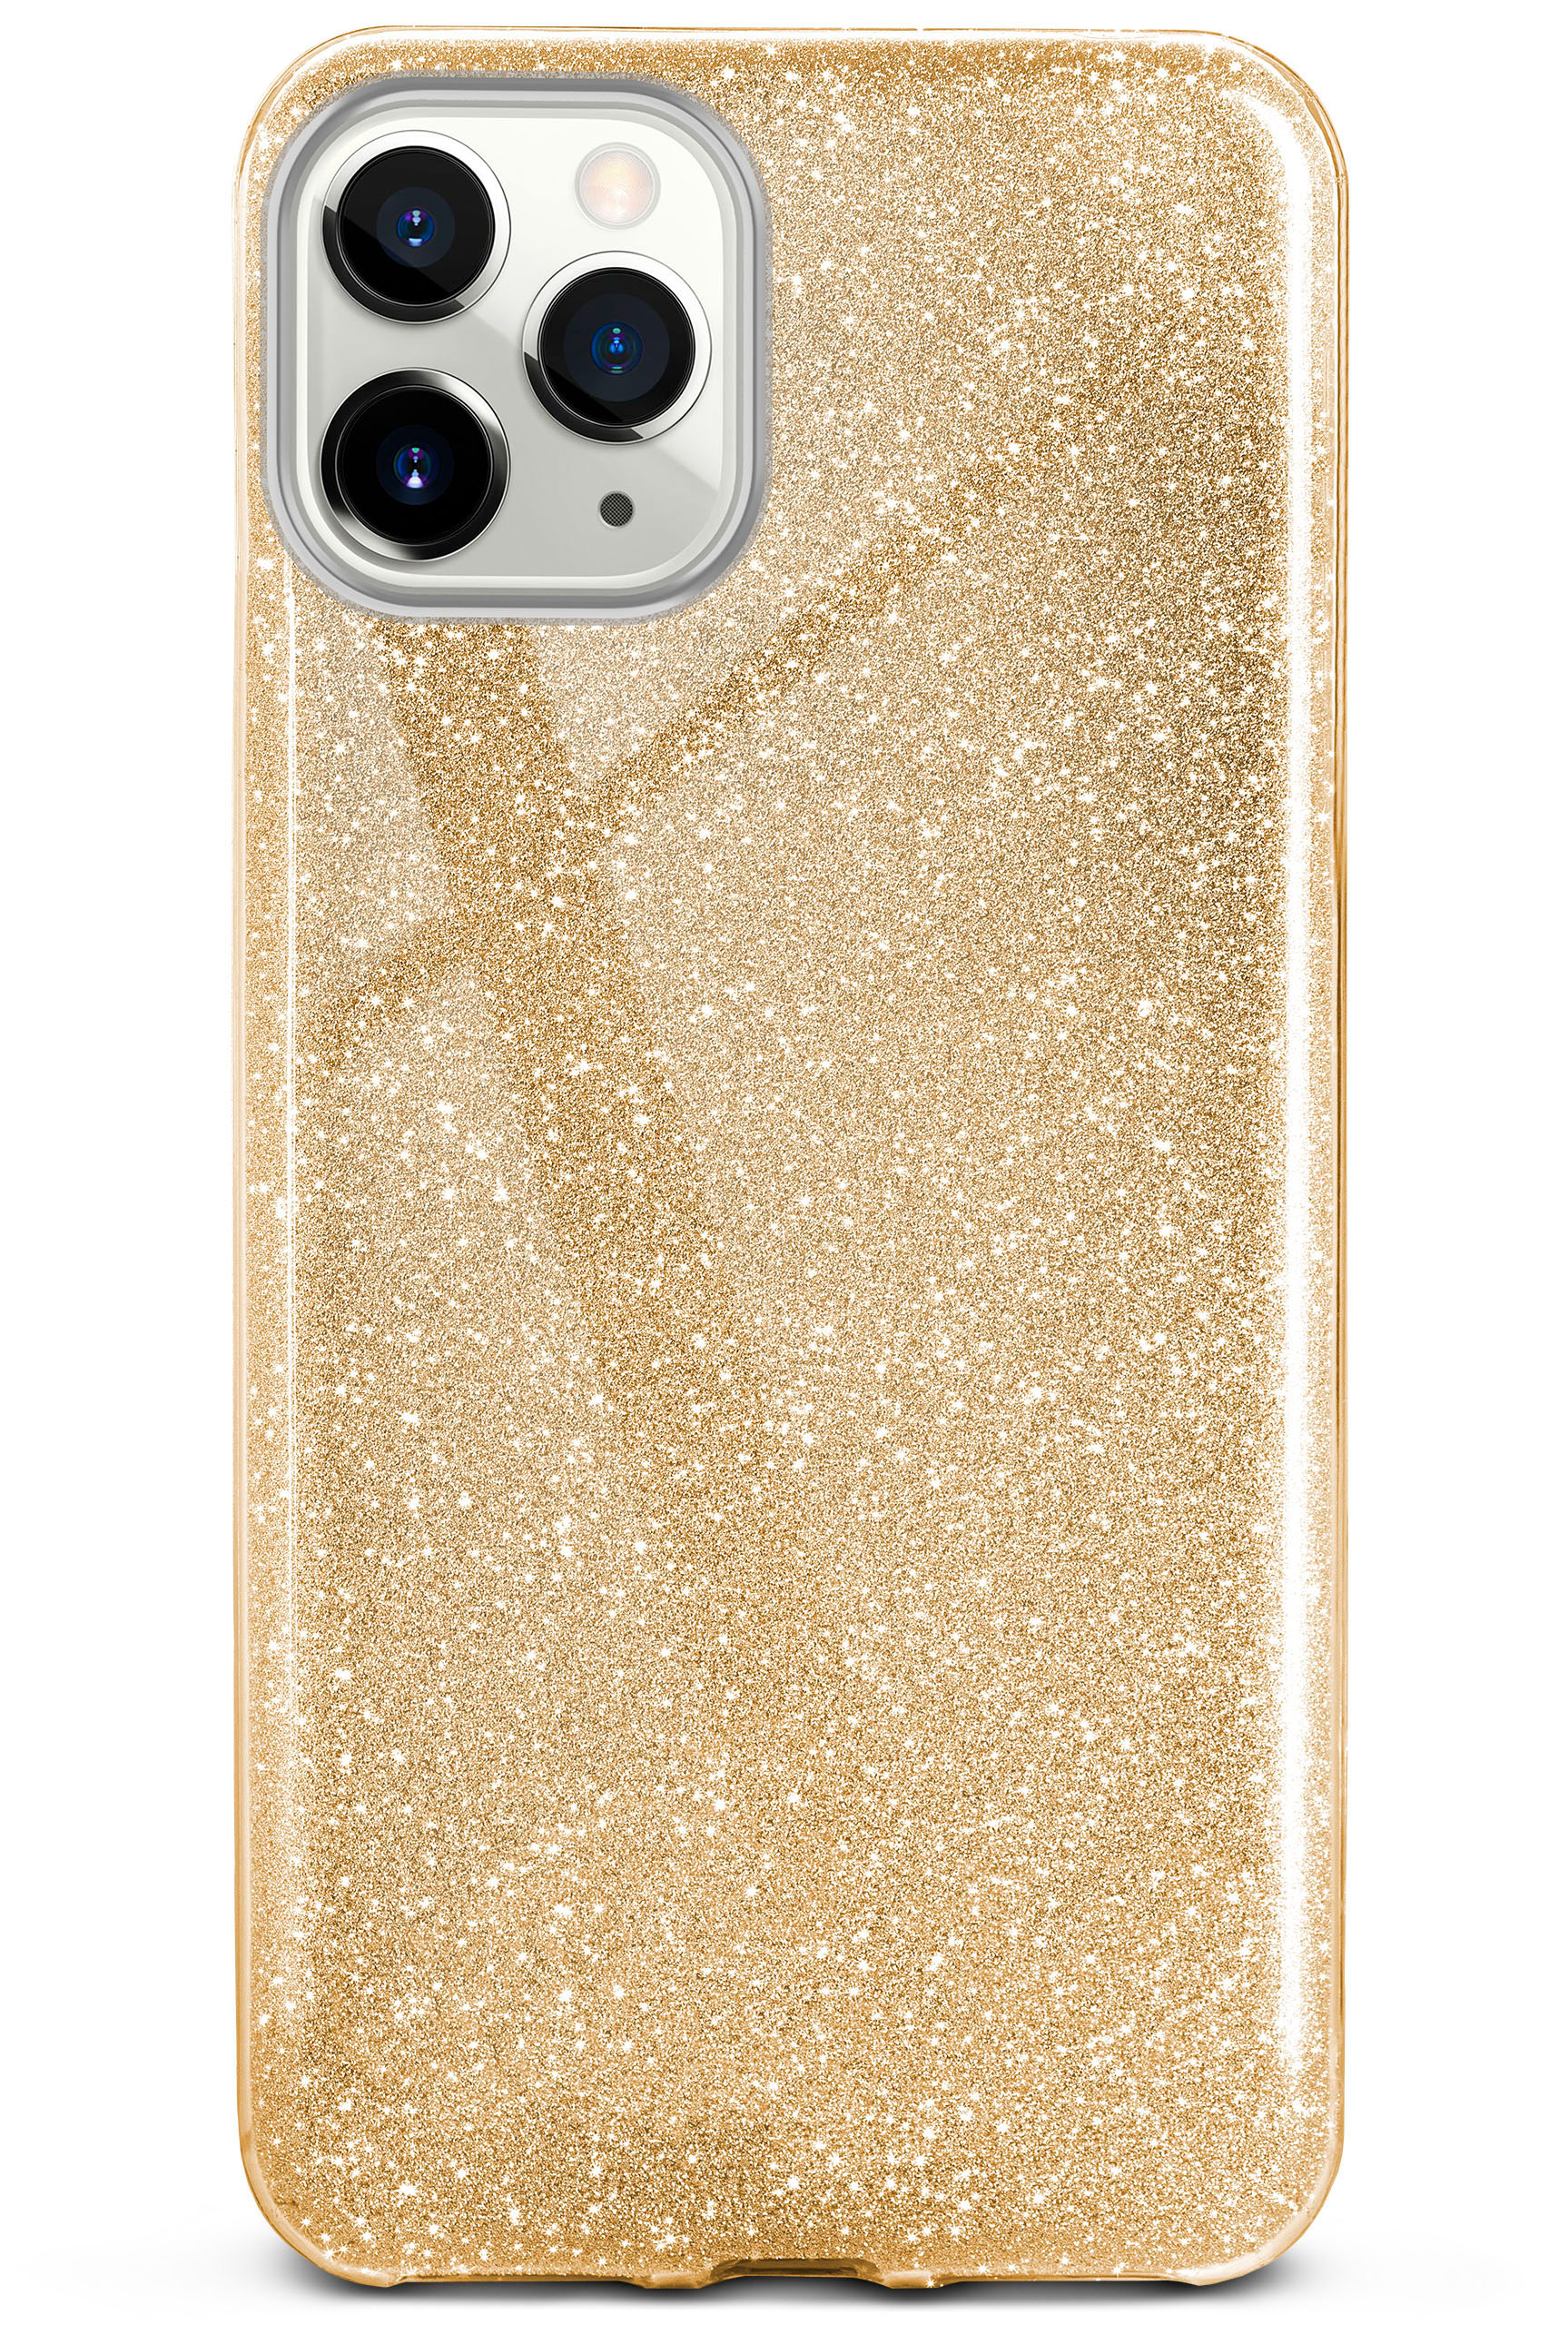 iPhone Backcover, Glitter Case, Gold Max, Shine Apple, ONEFLOW Pro - 11